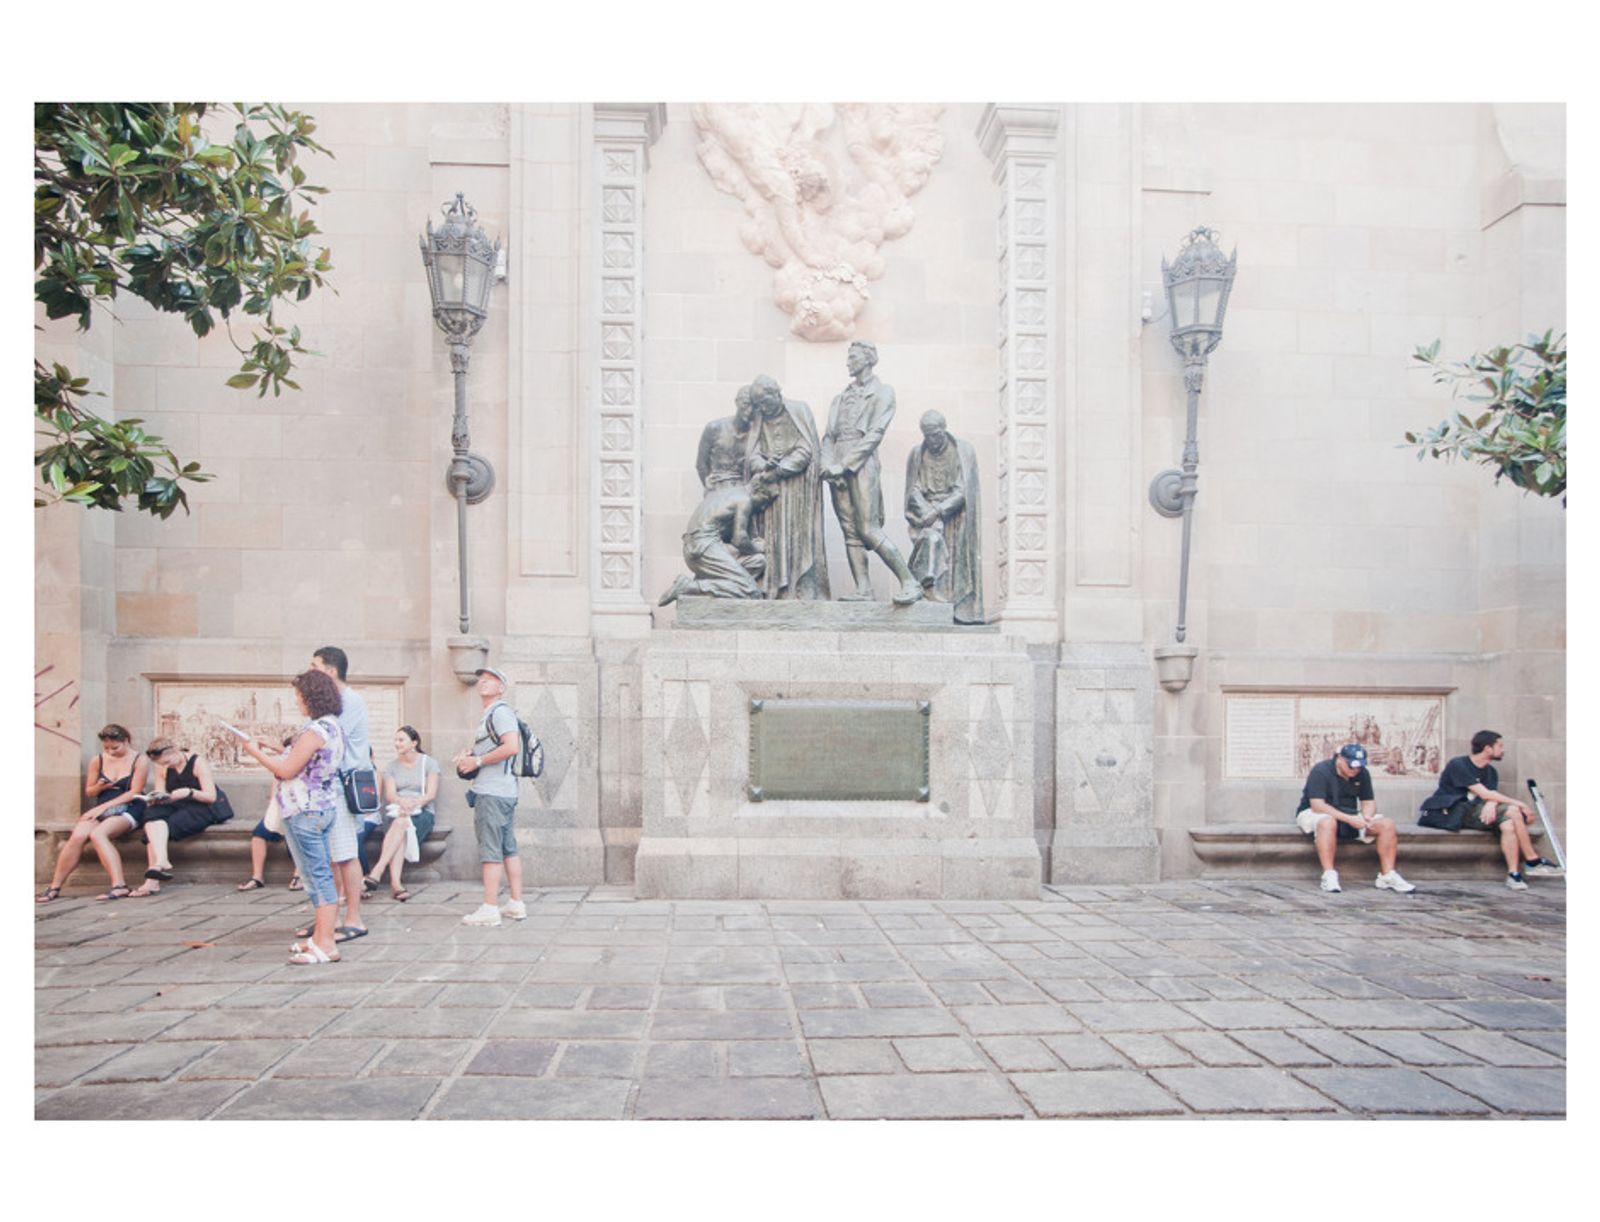 © Claudia Corrent - Image from the Barcelona photography project